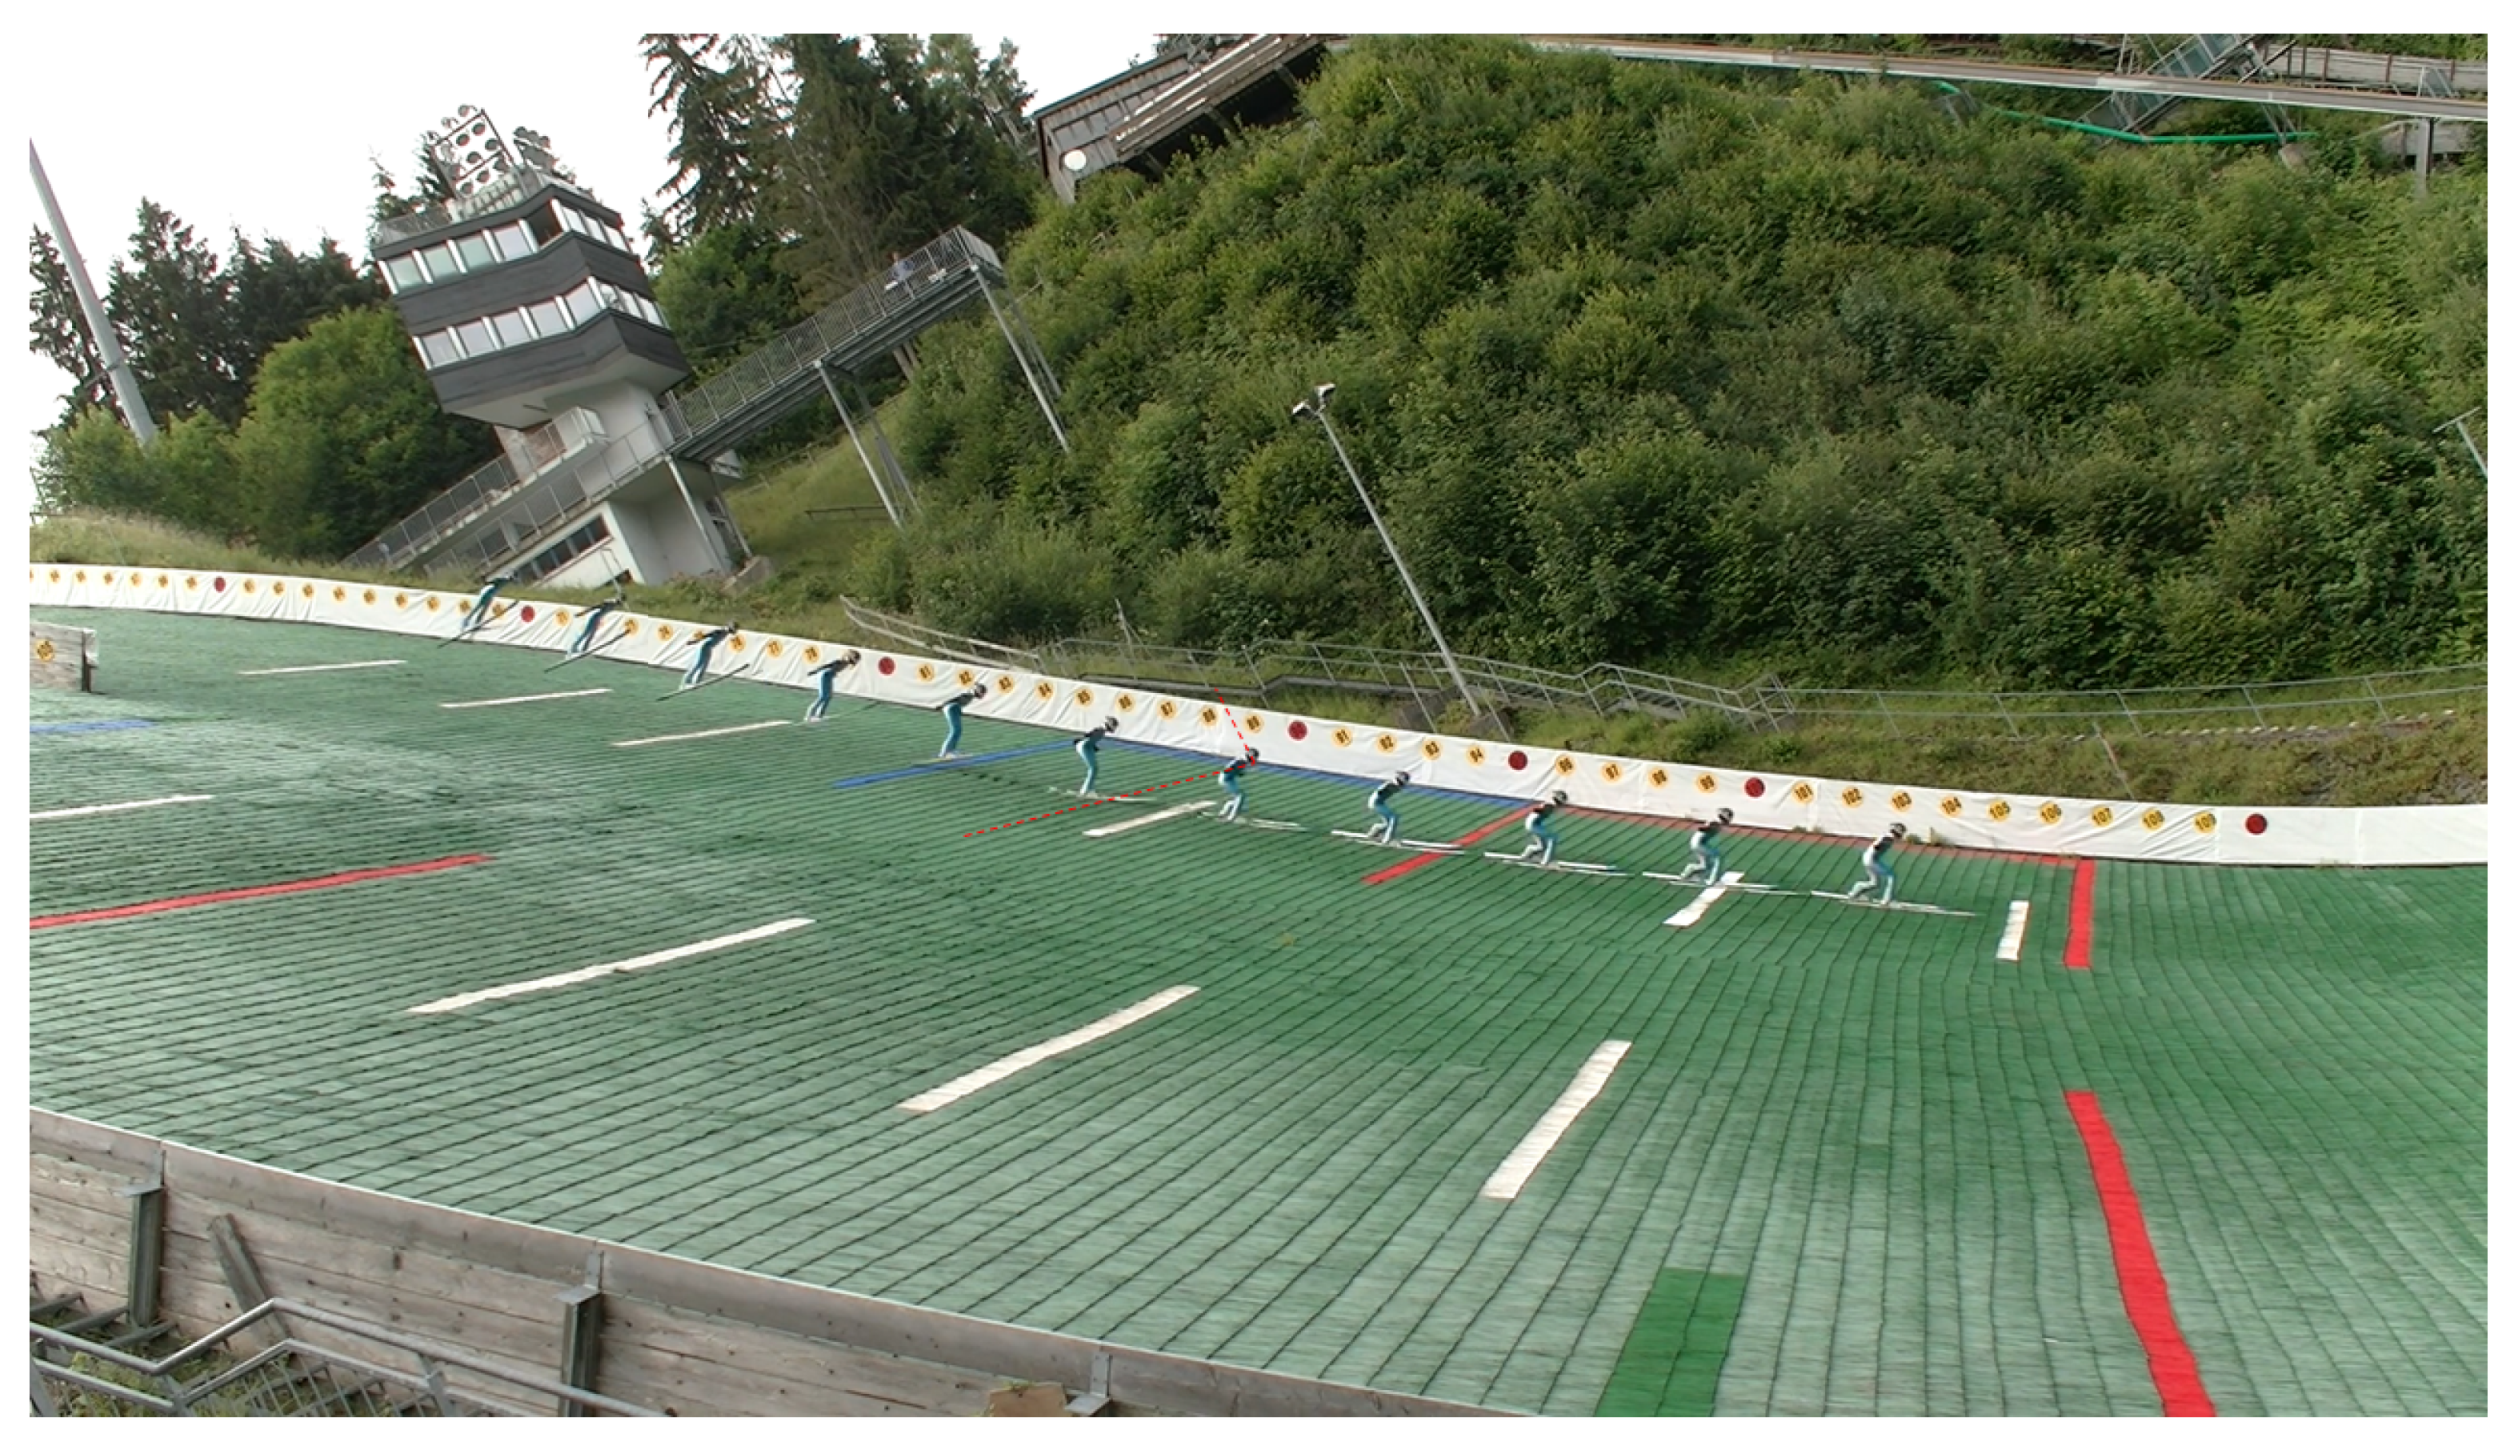 Sensors Free Full-Text Ski Jumping Trajectory Reconstruction Using Wearable Sensors via Extended Rauch-Tung-Striebel Smoother with State Constraints